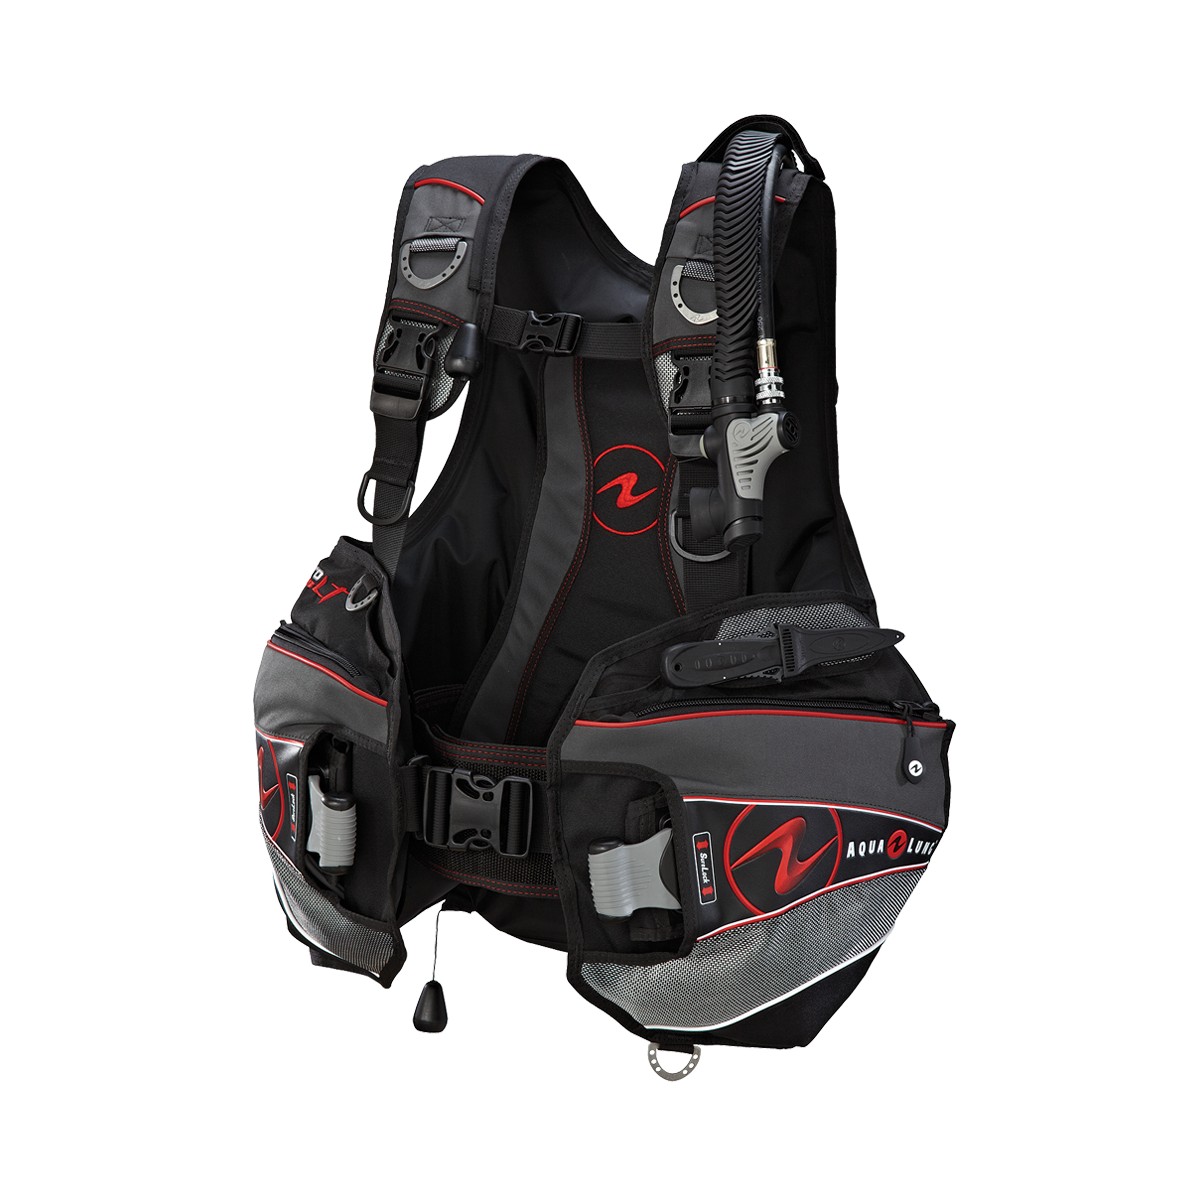 Aqua Lung Pro LT - ADV Style, Weight Intergrated BCD - DiveThings